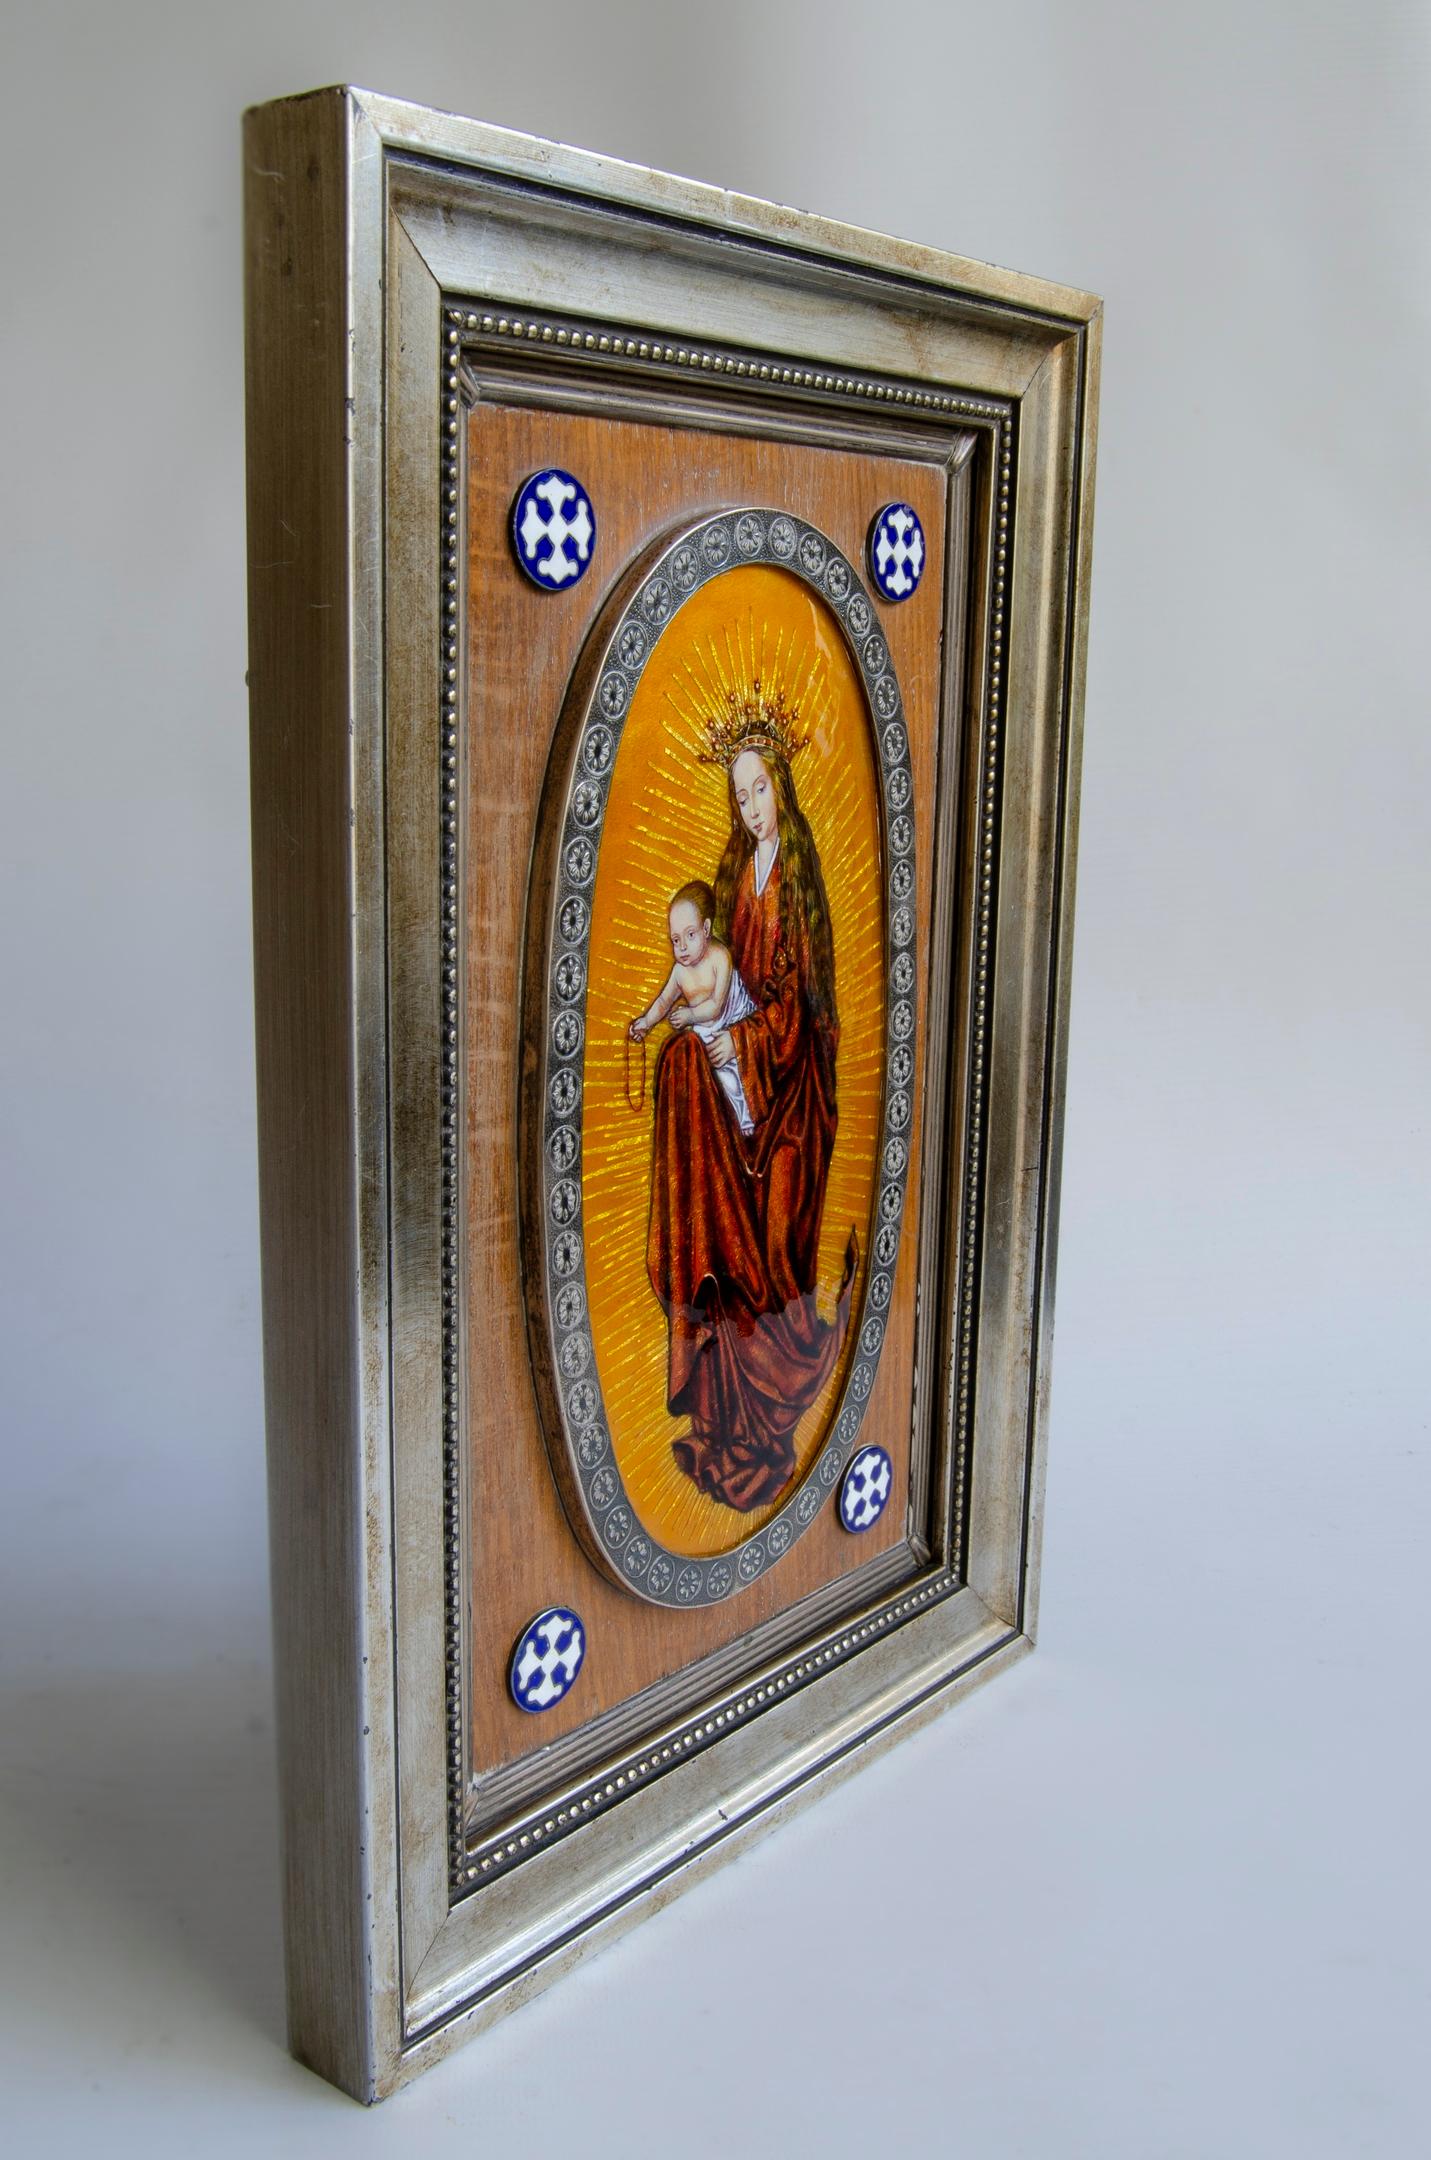 Virgin of silver and enamel (Masriera y Carrera)
the image of the virgin and her corners are made of silver
the frame is silver wood
made by Spanish artists Masriera y Carrera
Origin Spain 20th century
circa 1960.